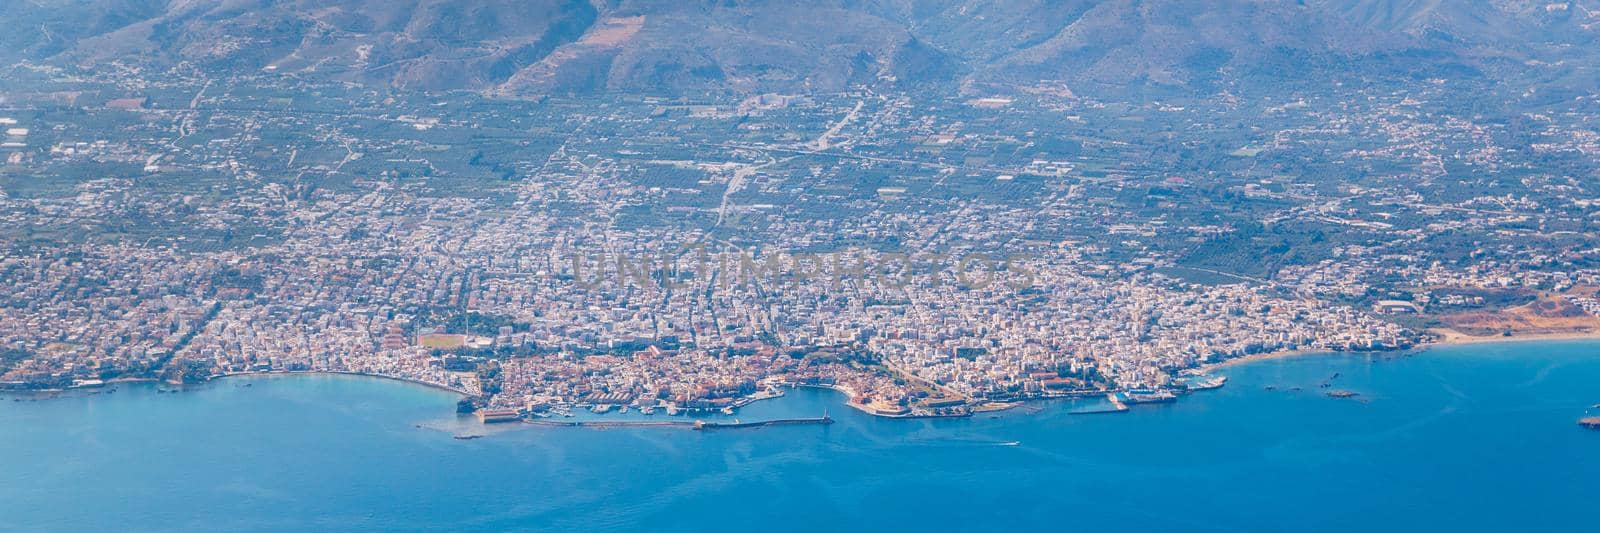 Crete island. Beautiful view of the Crete island Greece from the plane. Holiday, relaxation, sea. Crete view from plane. Greek Island. Seaside of Crete island, aerial view, Greece.